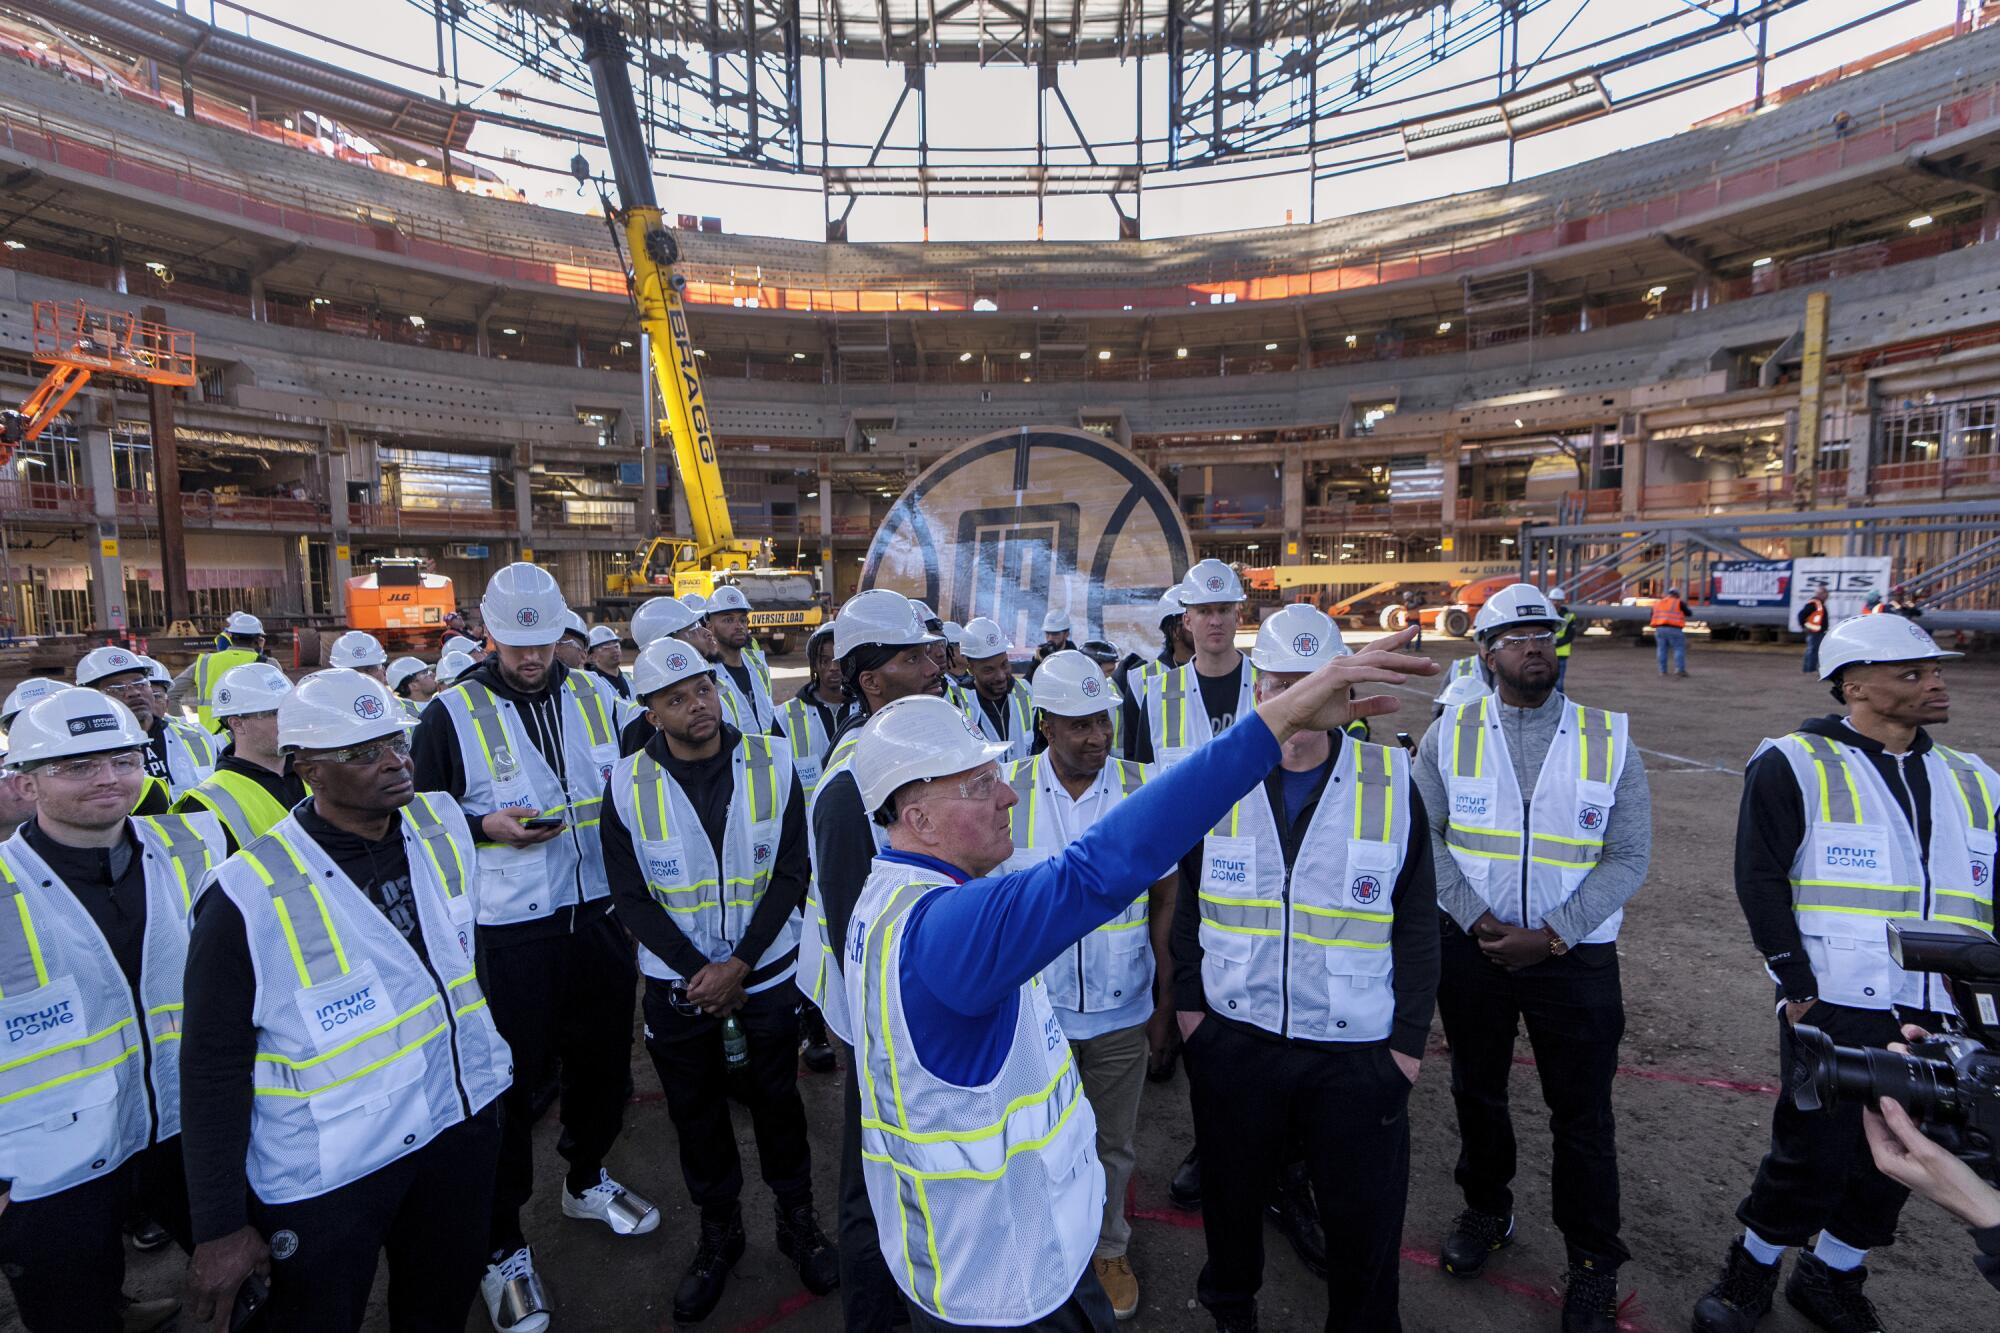 Los Angeles Clippers Chairman Steve Ballmer explains the seating area.